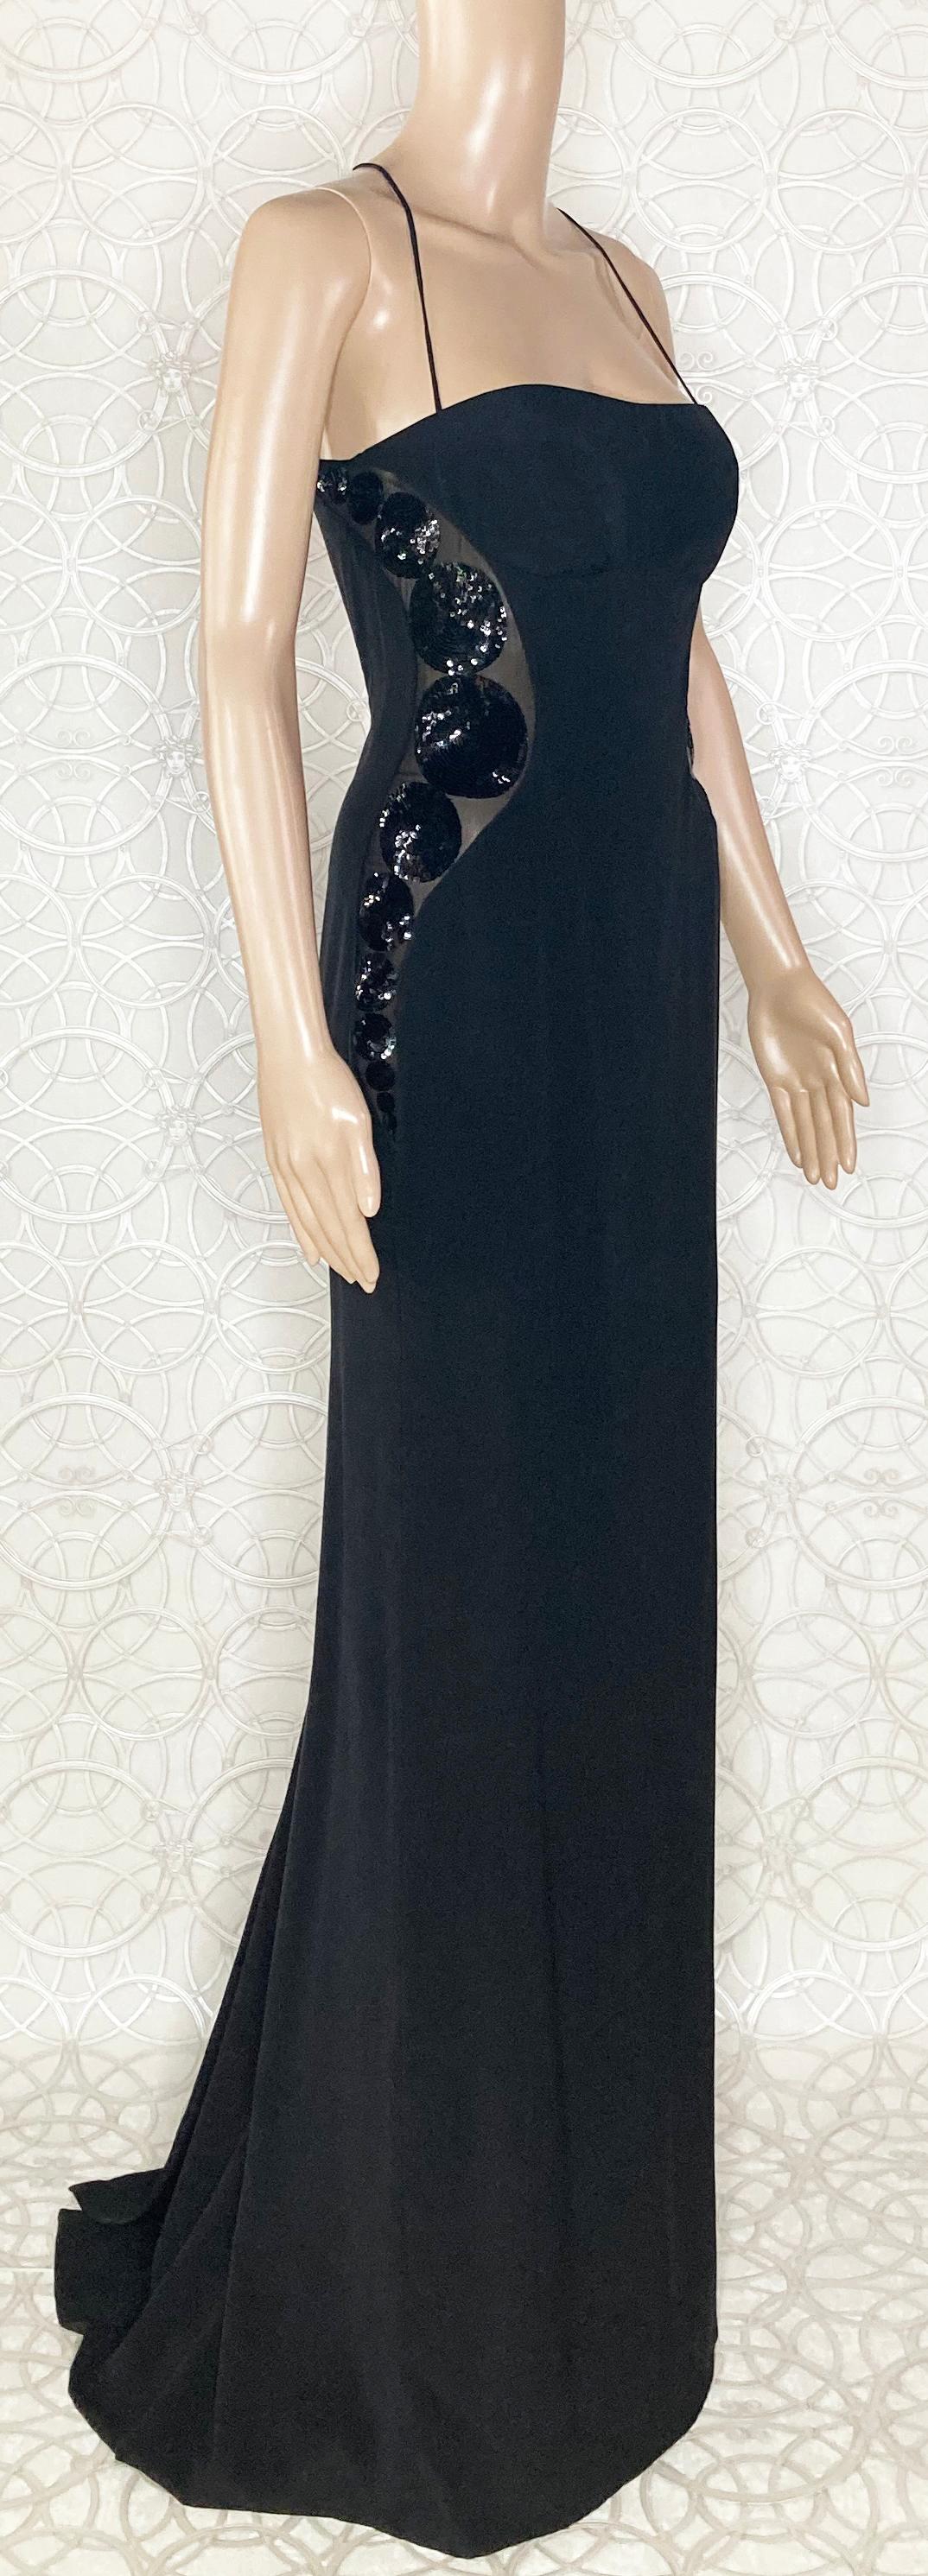 VERSACE BLACK PAILLETE DETAIL and OPEN BACK SILK LONG GOWN Dress 38 -2 For Sale 3